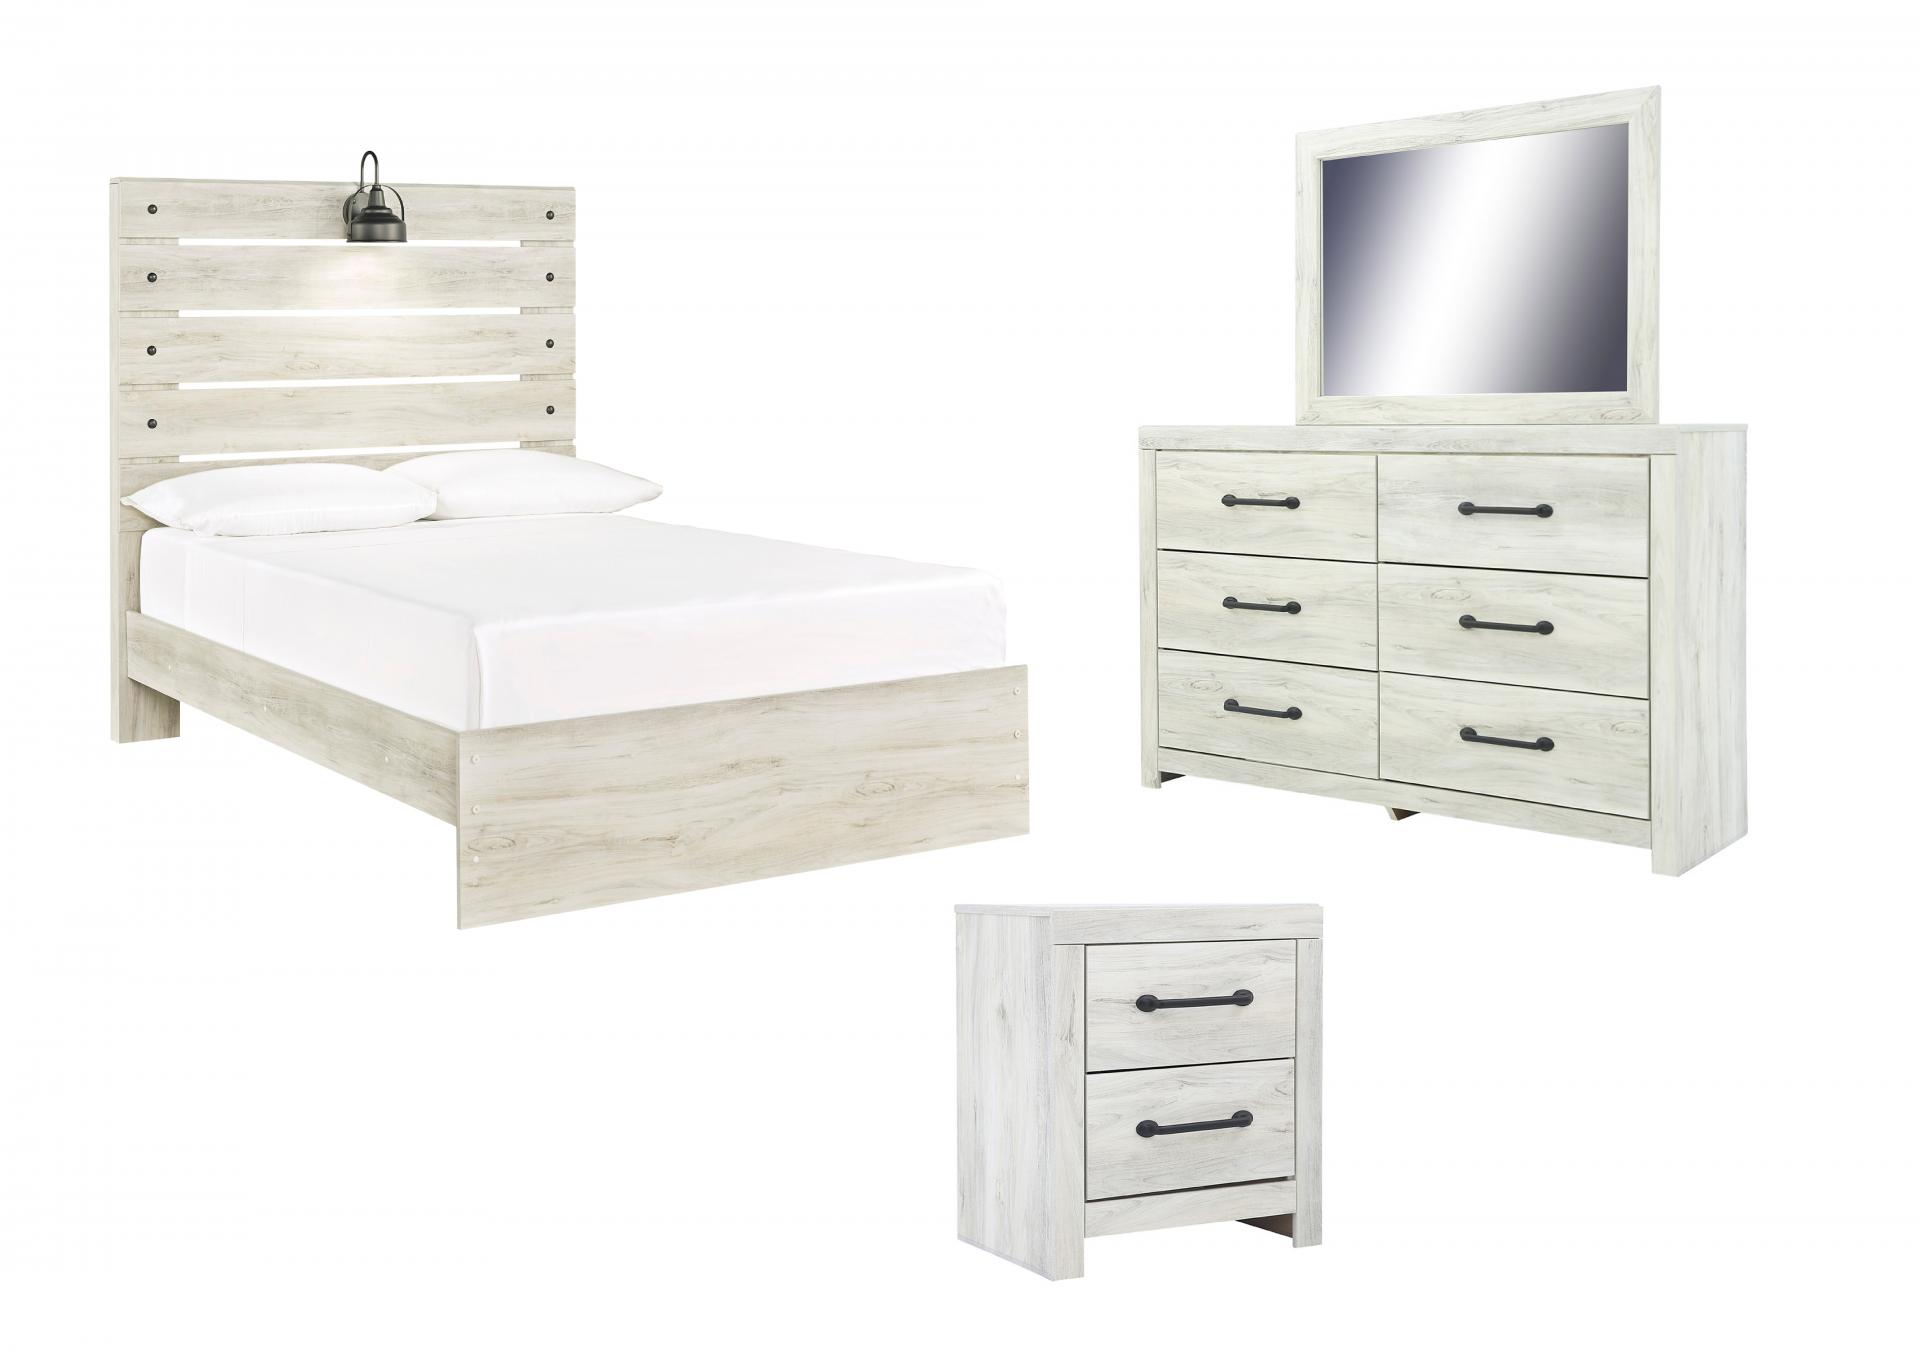 CAMBECK TWIN PANEL BEDROOM SET,ASHLEY FURNITURE INC.